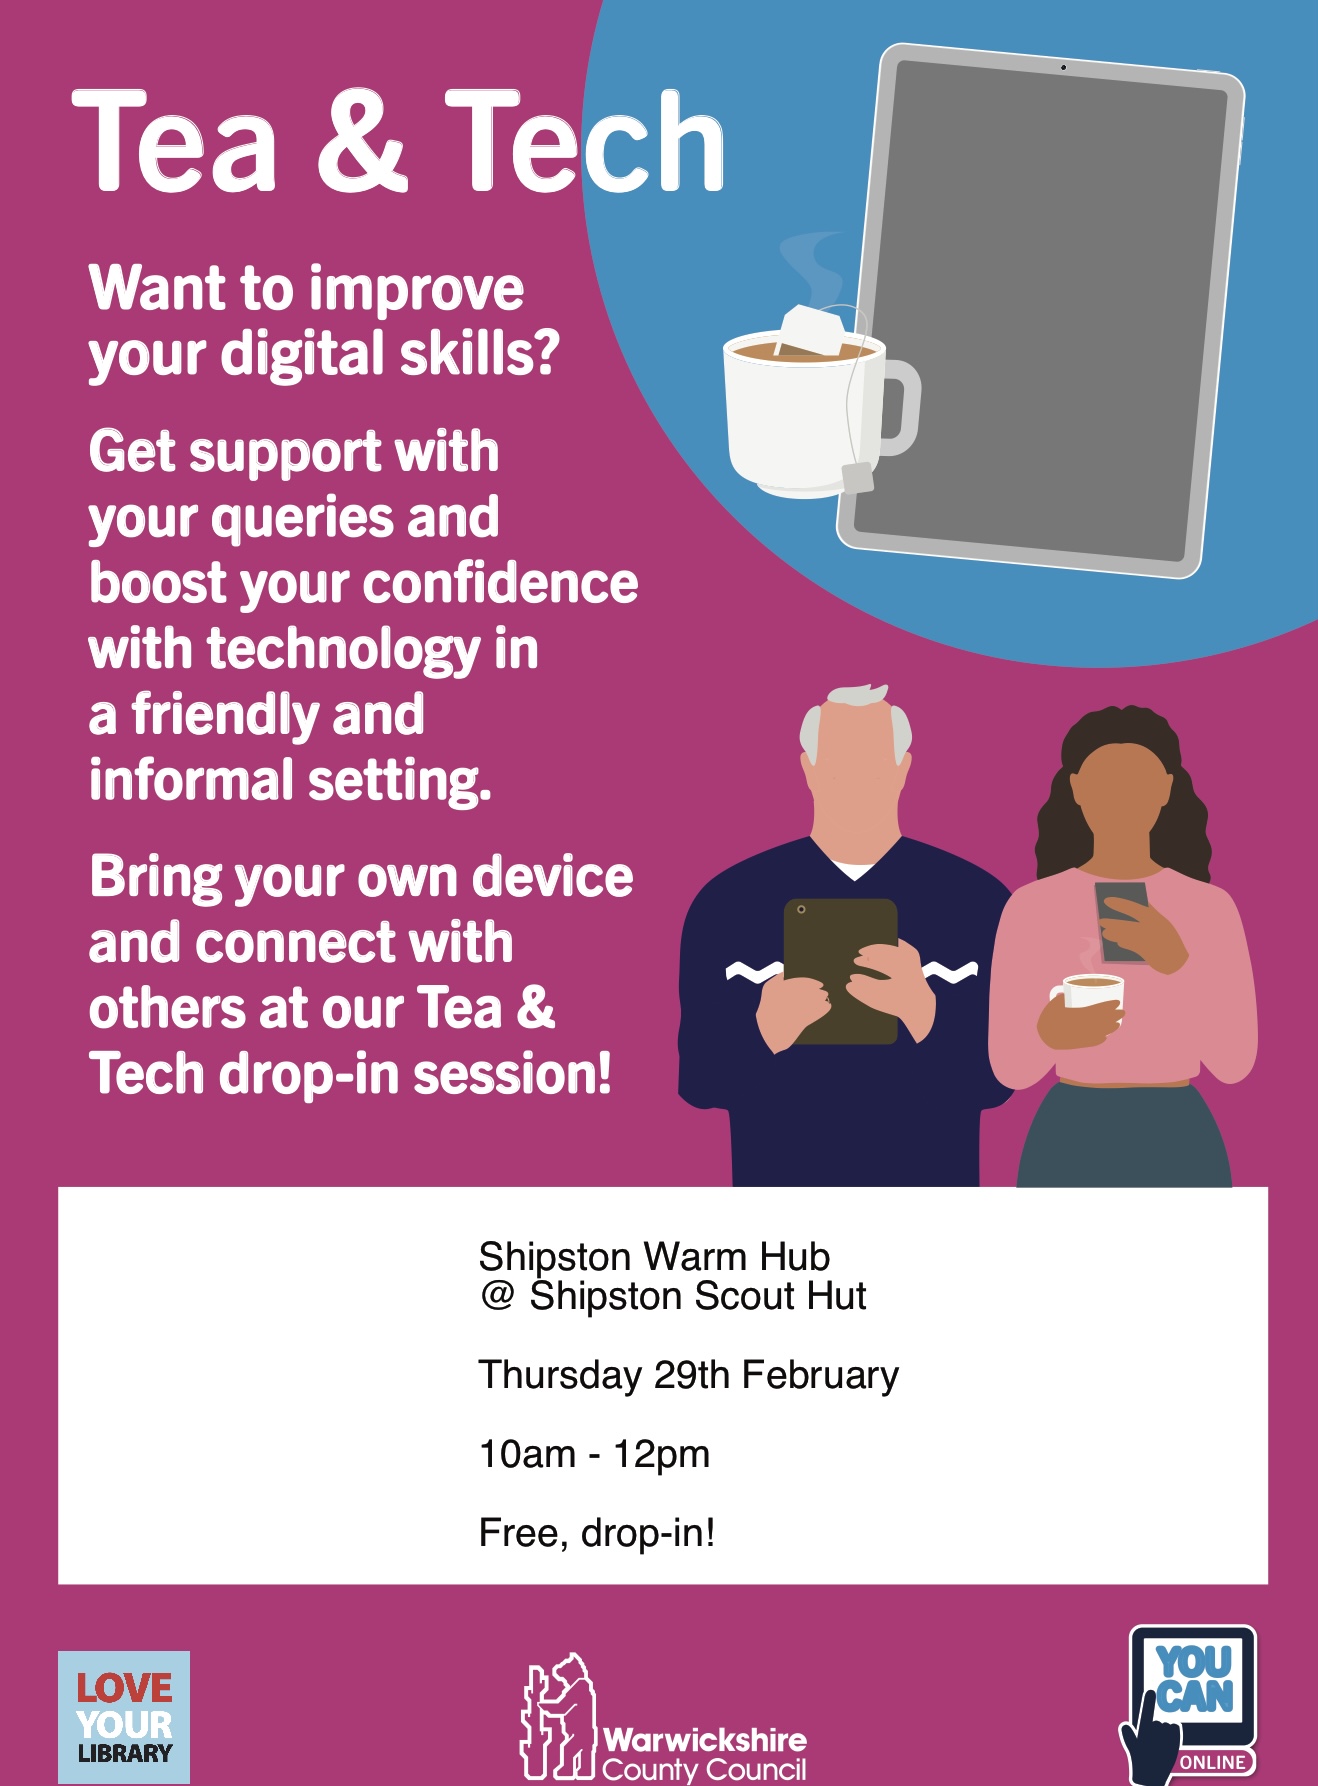 Tea and Tech Drop In Session at Shipston Community Warm Hub on Thursday 29 February